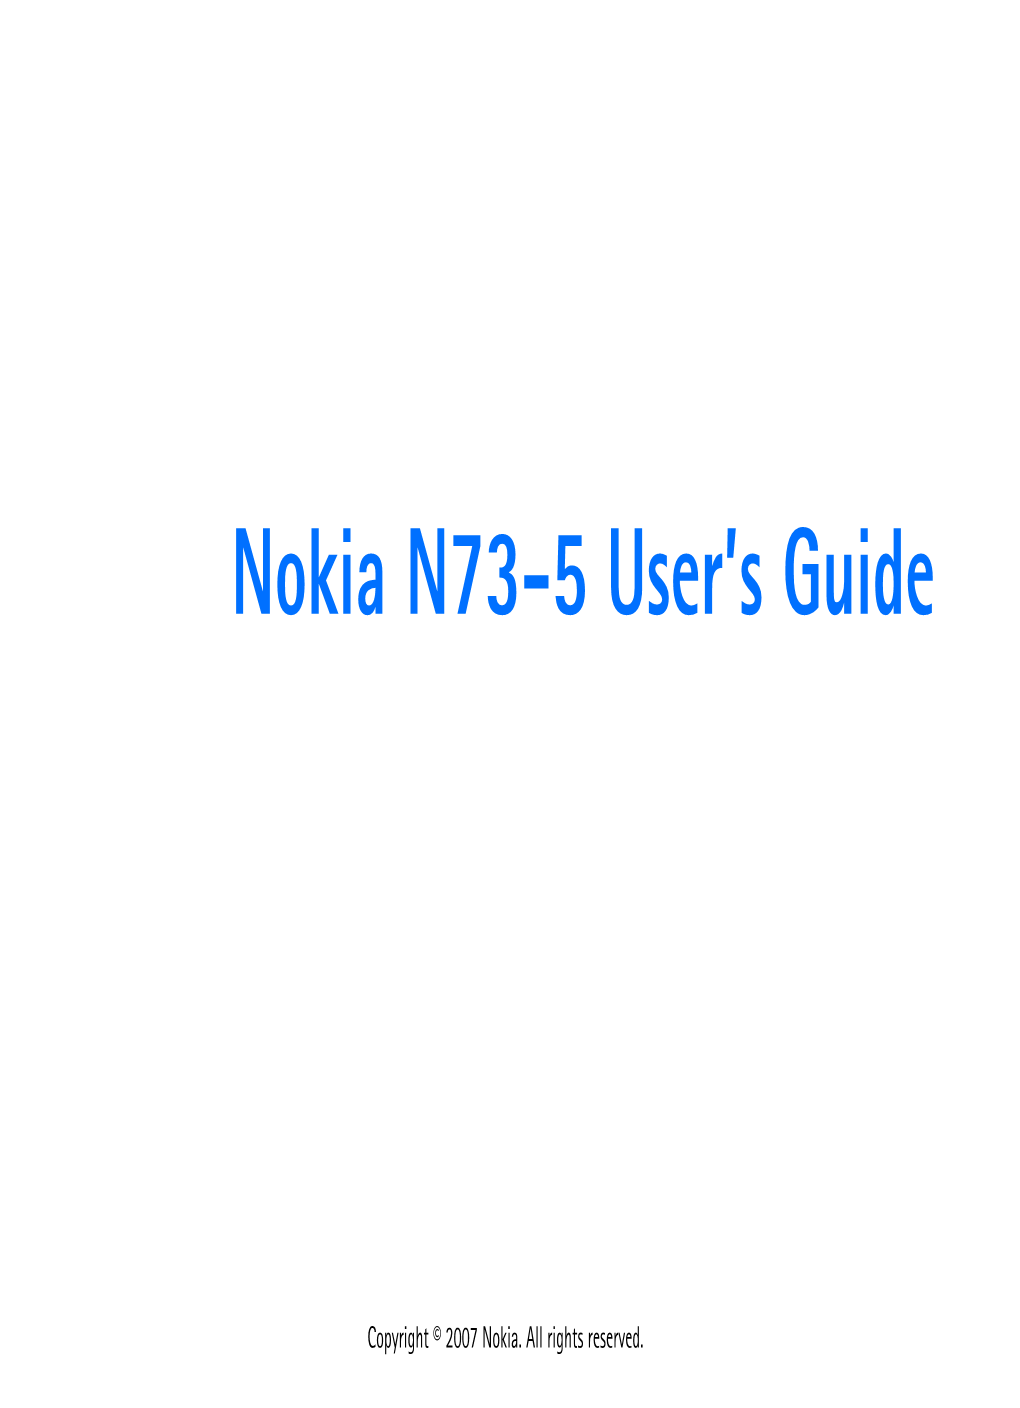 Nokia N73-5 User's Guide